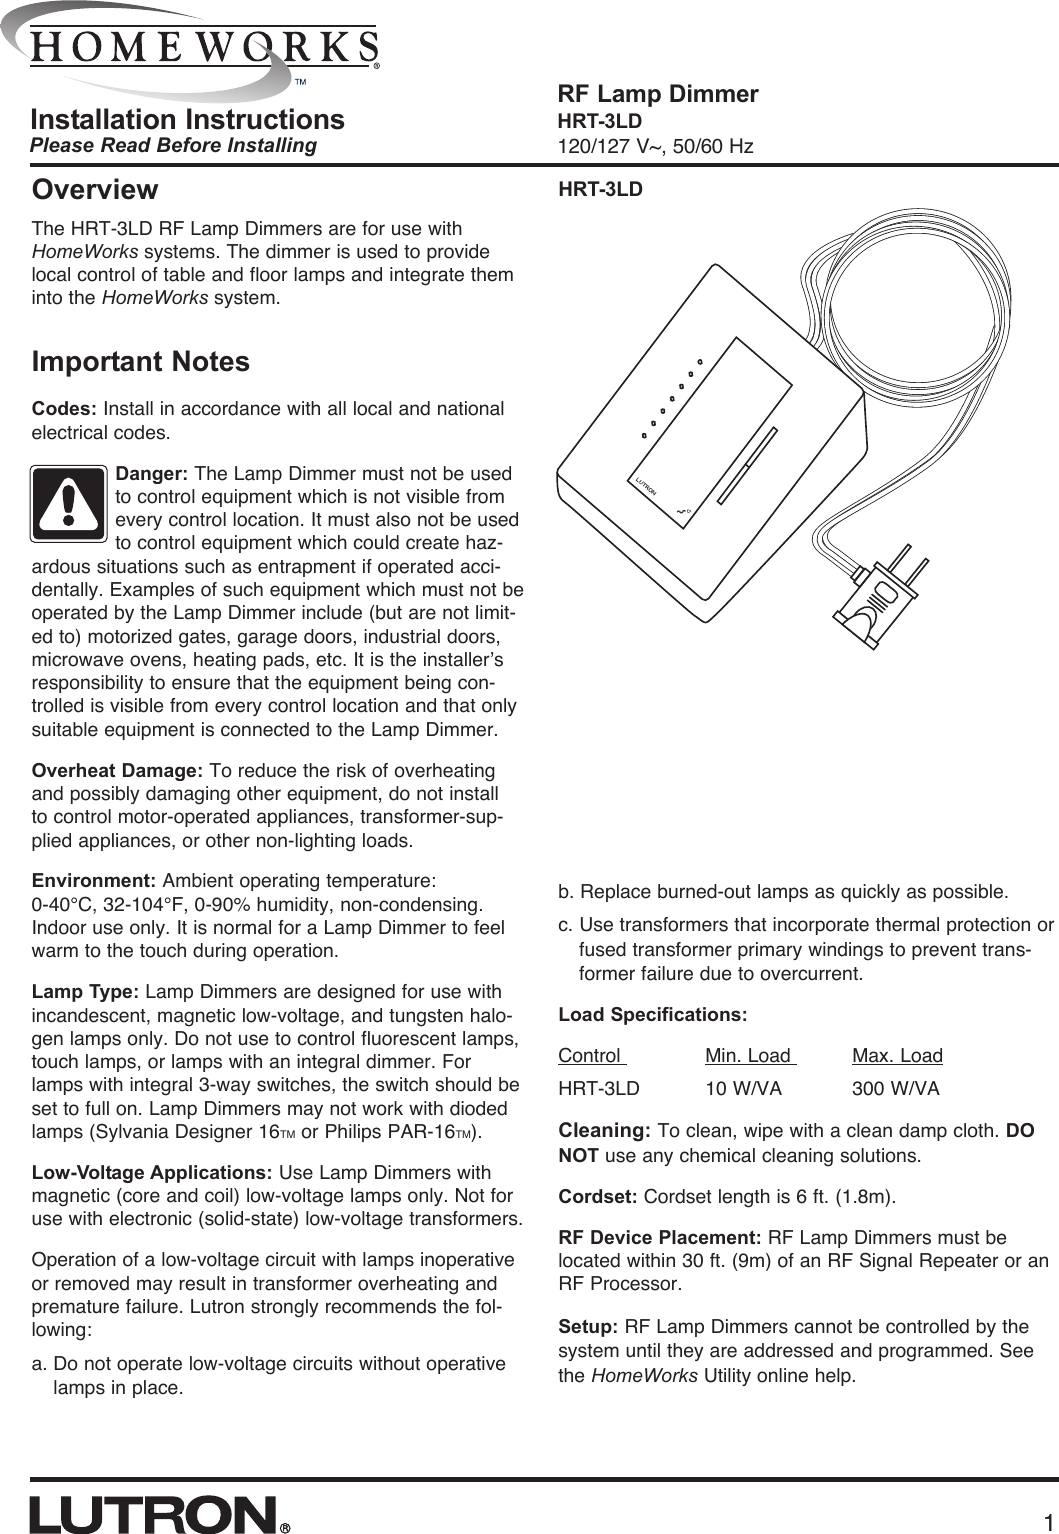 Please Read Before InstallingRF Lamp DimmerHRT-3LD120/127 V~, 50/60 HzInstallation InstructionsOverviewThe HRT-3LD RF Lamp Dimmers are for use withHomeWorks systems. The dimmer is used to providelocal control of table and floor lamps and integrate theminto the HomeWorks system.HRT-3LDImportant NotesCodes: Install in accordance with all local and nationalelectrical codes.Danger: The Lamp Dimmer must not be usedto control equipment which is not visible fromevery control location. It must also not be usedto control equipment which could create haz-ardous situations such as entrapment if operated acci-dentally. Examples of such equipment which must not beoperated by the Lamp Dimmer include (but are not limit-ed to) motorized gates, garage doors, industrial doors,microwave ovens, heating pads, etc. It is the installer’sresponsibility to ensure that the equipment being con-trolled is visible from every control location and that onlysuitable equipment is connected to the Lamp Dimmer.Overheat Damage: To reduce the risk of overheatingand possibly damaging other equipment, do not install to control motor-operated appliances, transformer-sup-plied appliances, or other non-lighting loads.Environment: Ambient operating temperature: 0-40°C, 32-104°F, 0-90% humidity, non-condensing.Indoor use only. It is normal for a Lamp Dimmer to feelwarm to the touch during operation.Lamp Type: Lamp Dimmers are designed for use withincandescent, magnetic low-voltage, and tungsten halo-gen lamps only. Do not use to control fluorescent lamps,touch lamps, or lamps with an integral dimmer. Forlamps with integral 3-way switches, the switch should beset to full on. Lamp Dimmers may not work with diodedlamps (Sylvania Designer 16TM or Philips PAR-16TM).Low-Voltage Applications: Use Lamp Dimmers withmagnetic (core and coil) low-voltage lamps only. Not foruse with electronic (solid-state) low-voltage transformers. Operation of a low-voltage circuit with lamps inoperativeor removed may result in transformer overheating andpremature failure. Lutron strongly recommends the fol-lowing: a. Do not operate low-voltage circuits without operativelamps in place.1b. Replace burned-out lamps as quickly as possible.c. Use transformers that incorporate thermal protection orfused transformer primary windings to prevent trans-former failure due to overcurrent.Load Specifications:Control  Min. Load  Max. LoadHRT-3LD  10 W/VA 300 W/VACleaning: To clean, wipe with a clean damp cloth. DONOT use any chemical cleaning solutions.Cordset: Cordset length is 6 ft. (1.8m).RF Device Placement: RF Lamp Dimmers must belocated within 30 ft. (9m) of an RF Signal Repeater or anRF Processor. Setup: RF Lamp Dimmers cannot be controlled by thesystem until they are addressed and programmed. Seethe HomeWorks Utility online help.